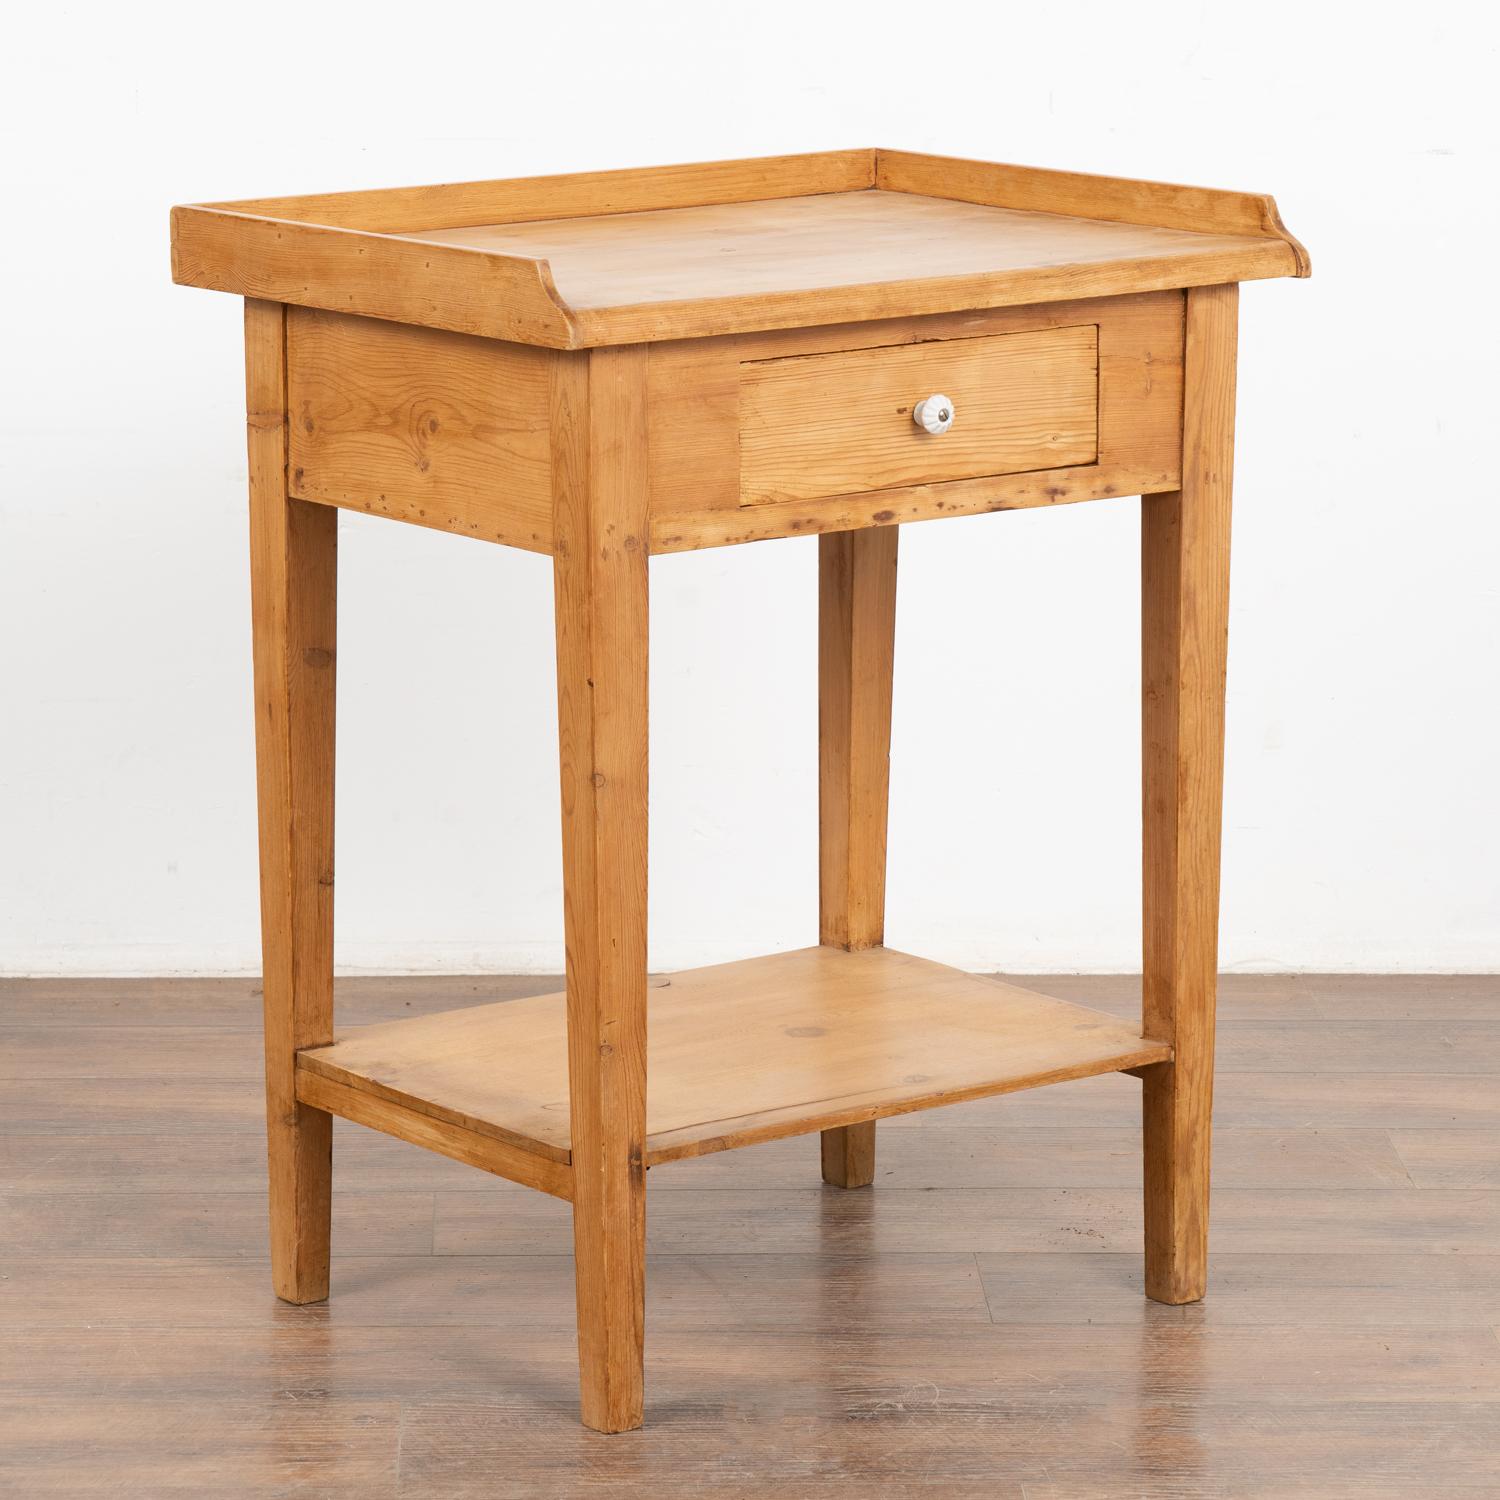 This delightful country pine table with single drawer and raised rim will make a casual side table or nightstand. 
This table has been restored, the drawer functions and it is ready to be used and enjoyed.
All scratches, cracks, dings, and age